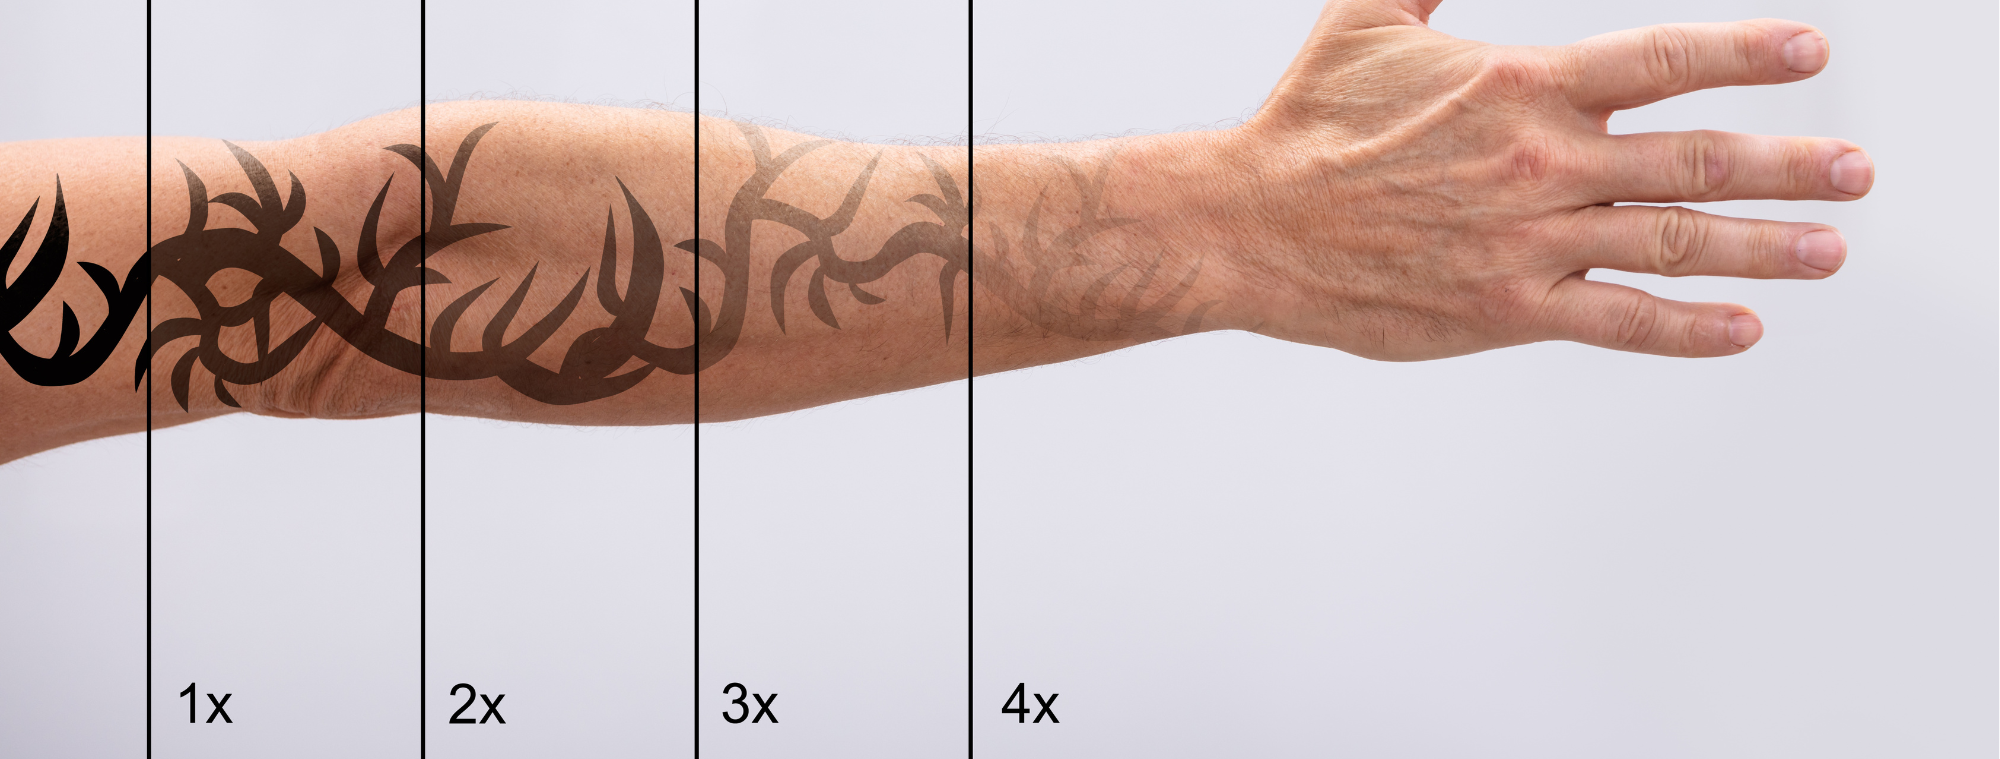 How to become a Laser Tattoo Removal Technician, UK?